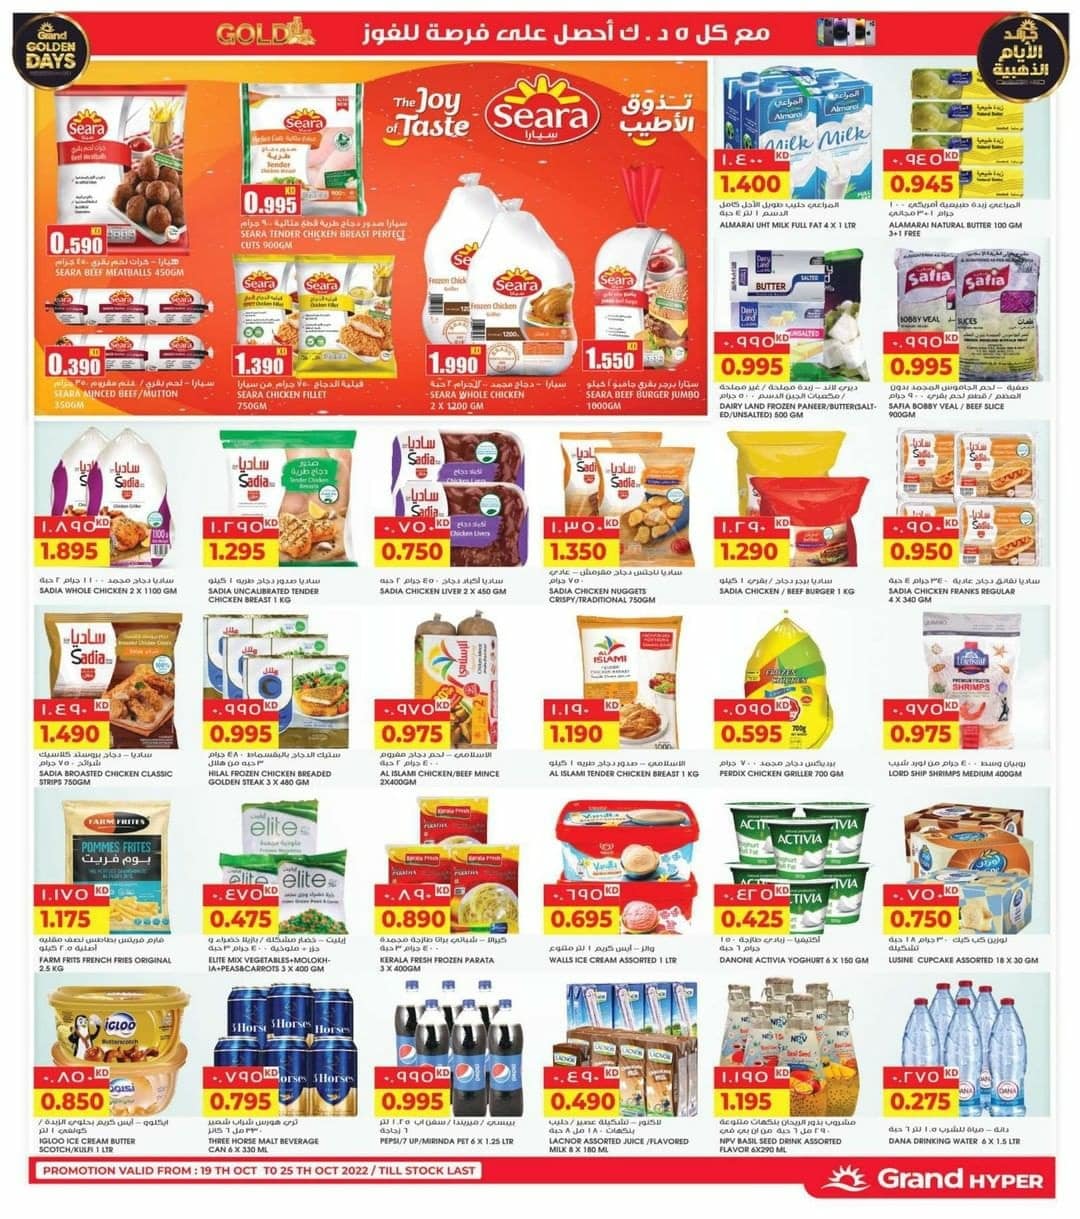 Grand Hyper Special Diwali offers 70%, Kuwait Promotions 4